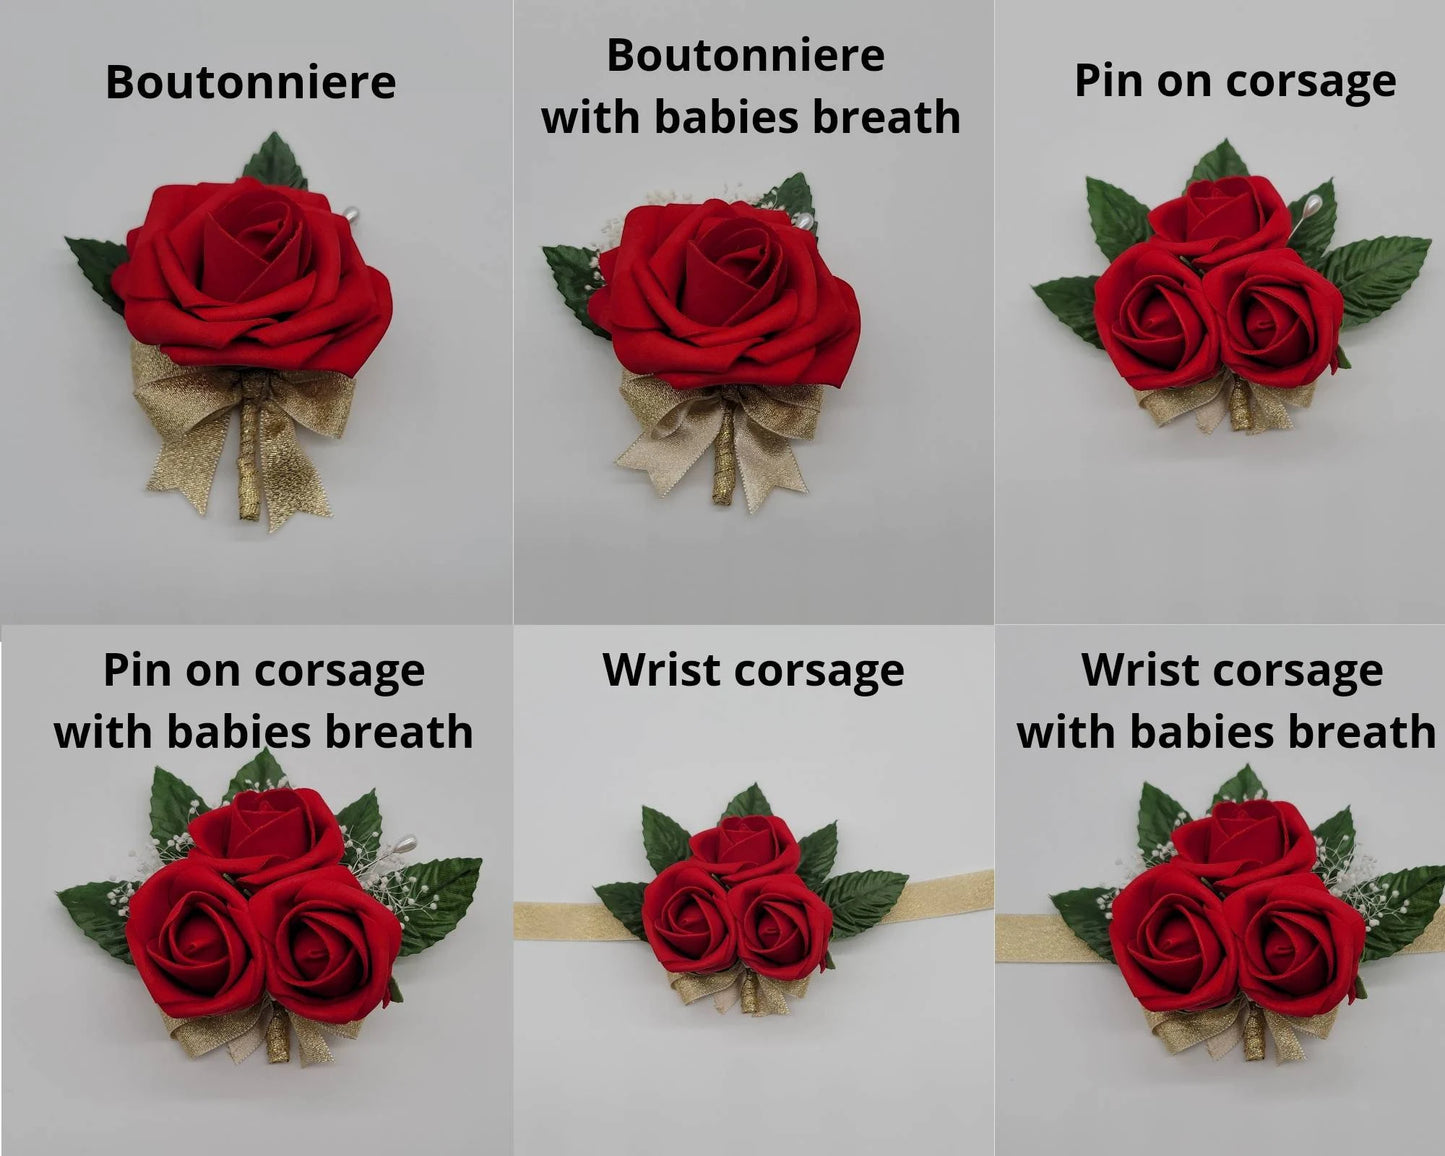 Burgundy and Black Boutonnieres and Corsages